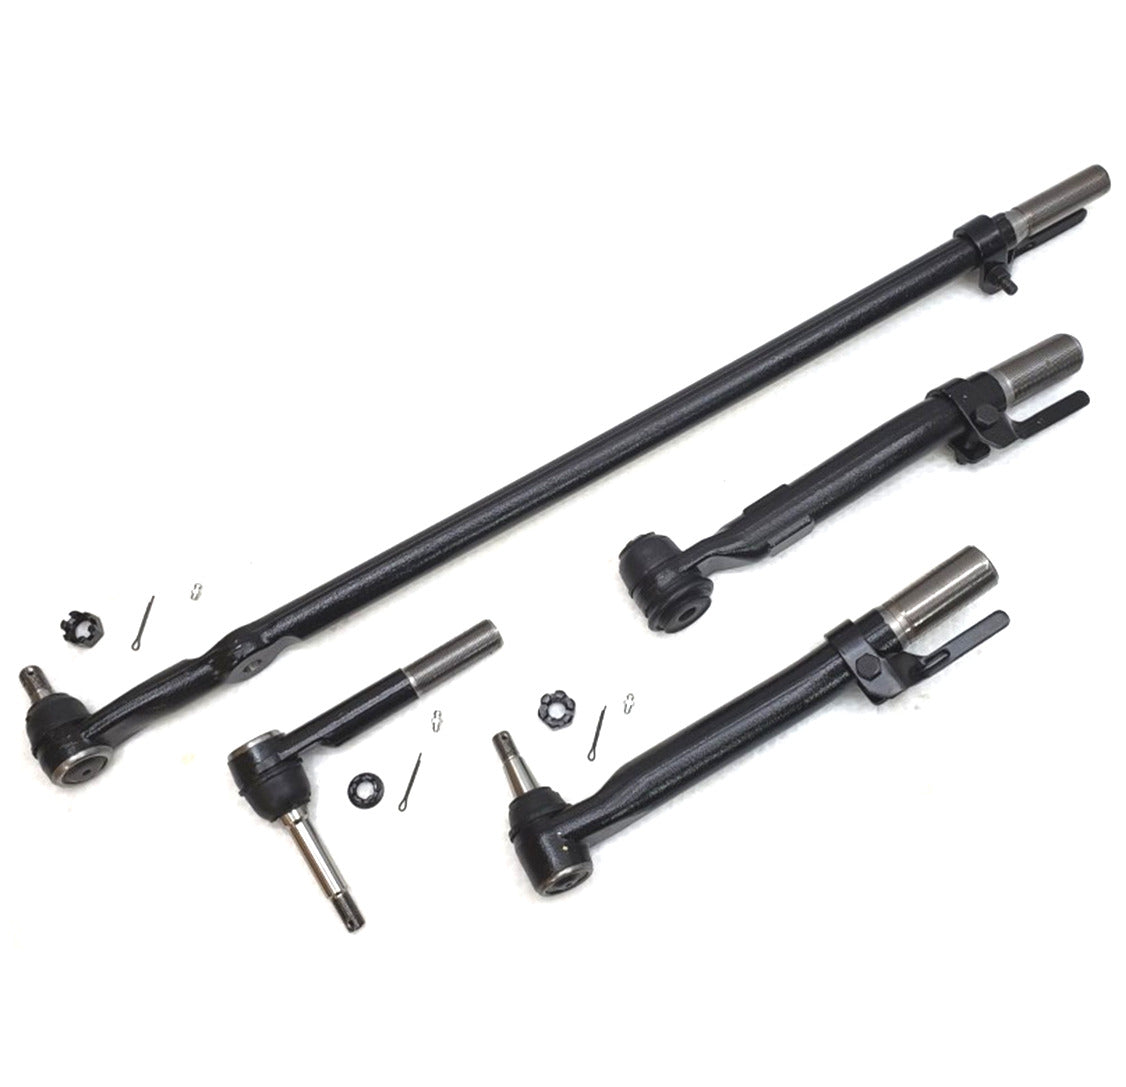 XRF Tie Rod Drag Link Steering Kit for 2008-2010 Ford F250, F350 Super Duty 4x4